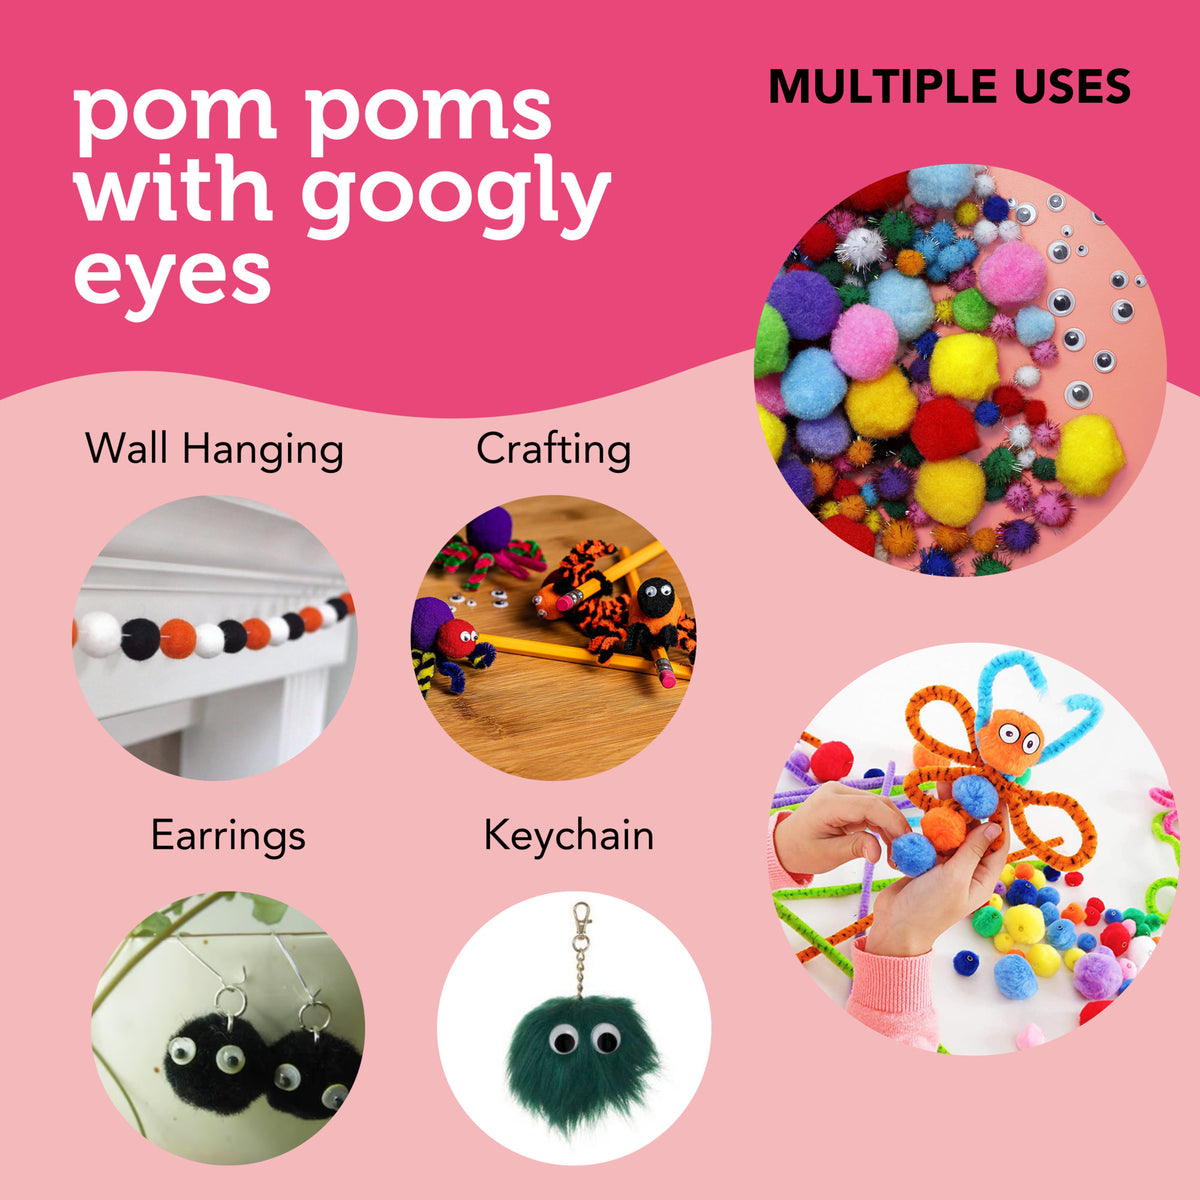 FUNZBO Arts and Crafts Supplies for Kids - Kids Crafts for Kids Ages 4-8  with Construction Paper, Pom Poms, Googly Eyes & Pony Beads, Crafts  Activties